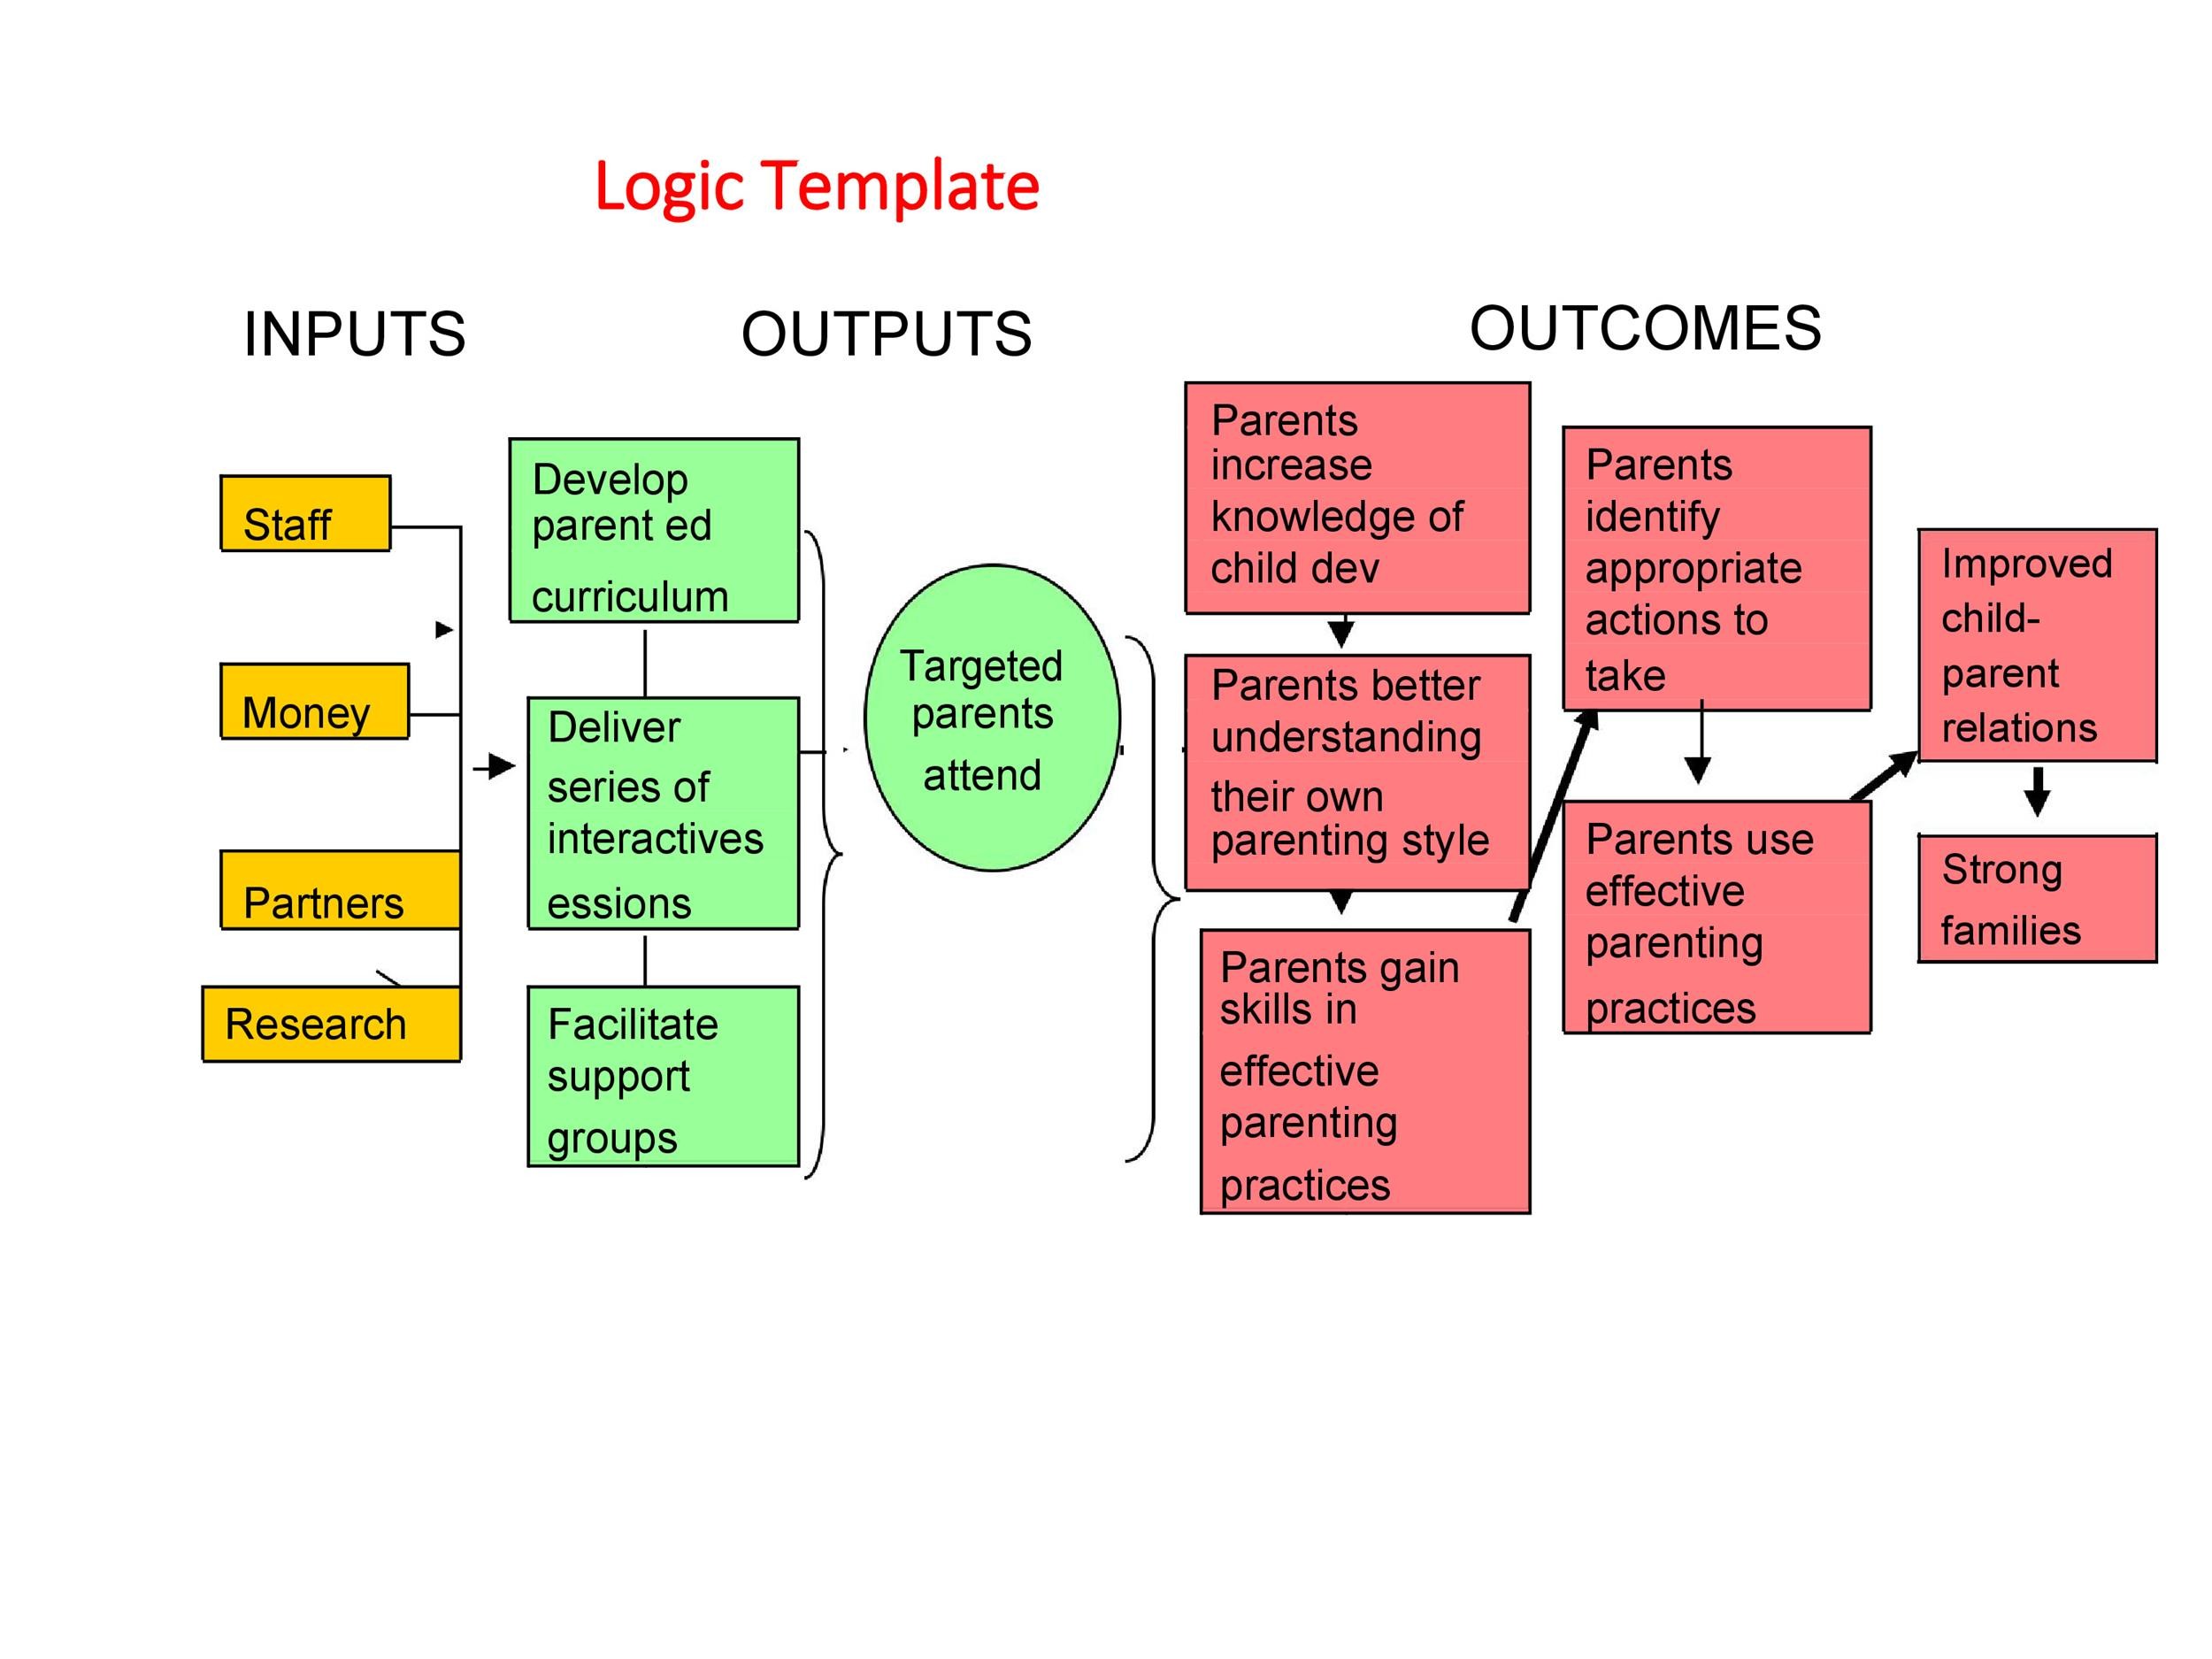 More than 40 Logic Model Templates Examples ᐅ TemplateLab